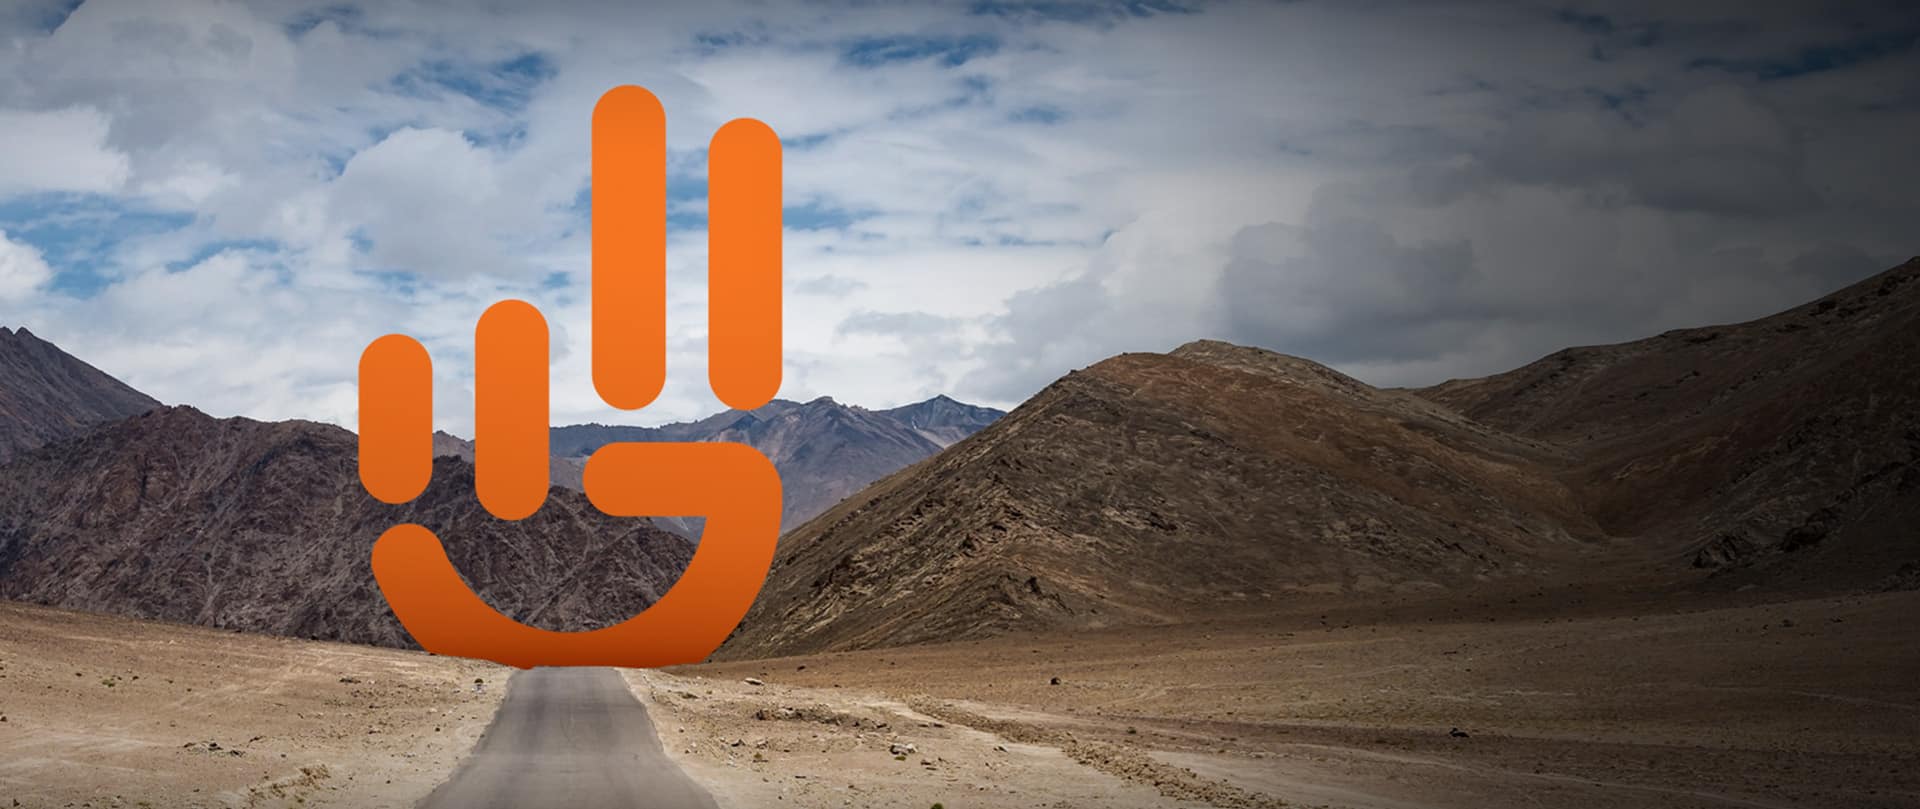 Jeep Wave logo superimposed on an open road leading to the mountains.